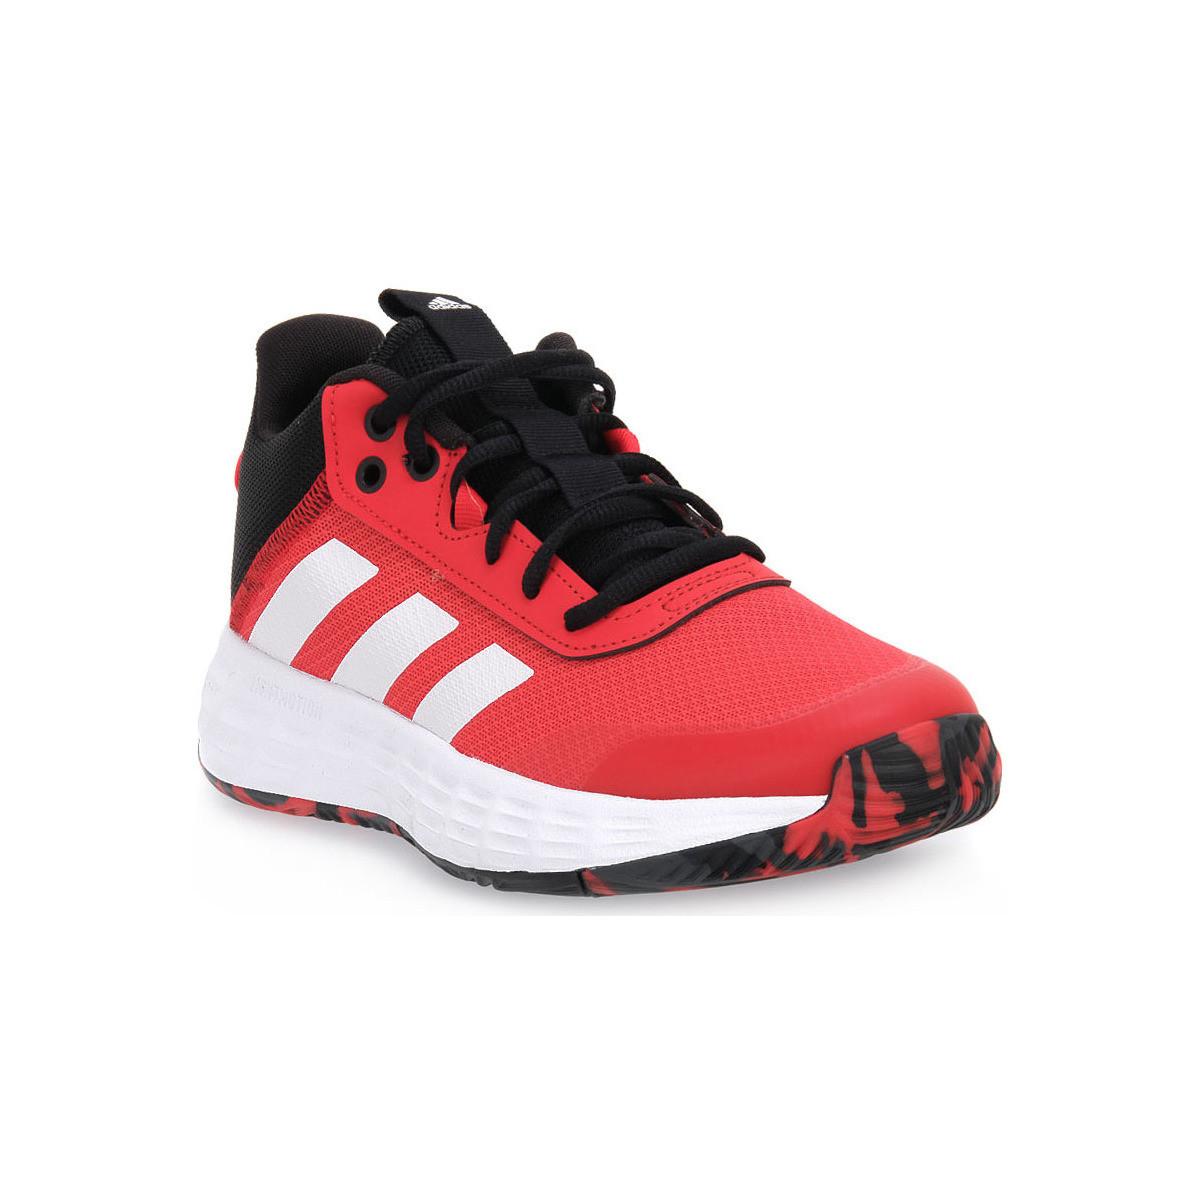 Sneakers adidas OWNTHE GAME 2